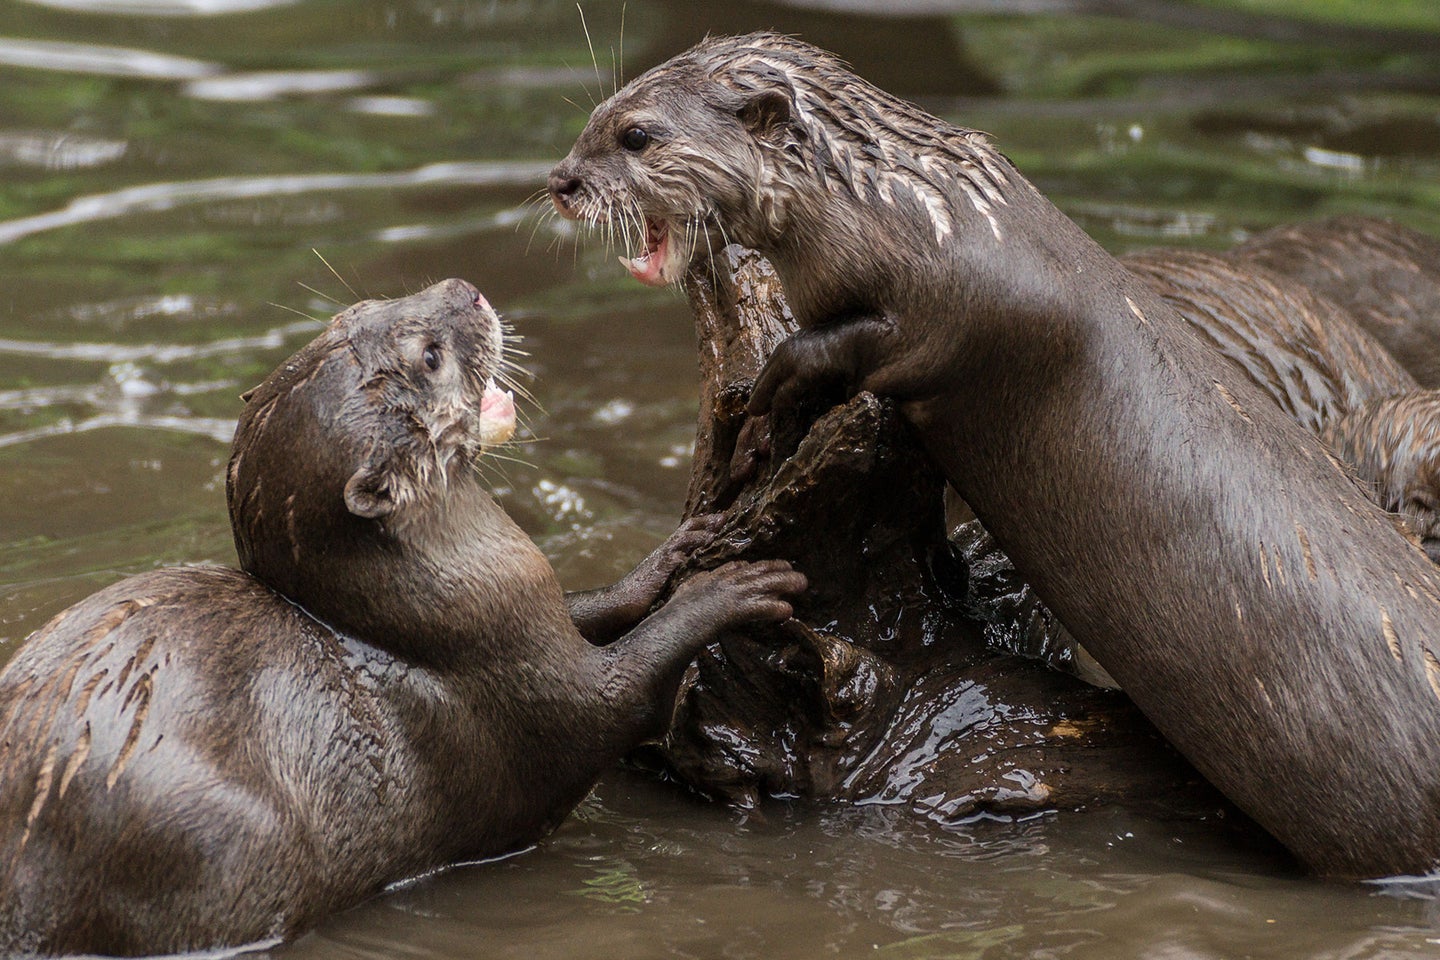 River otters can be aggressive when defending territory or protecting their young.